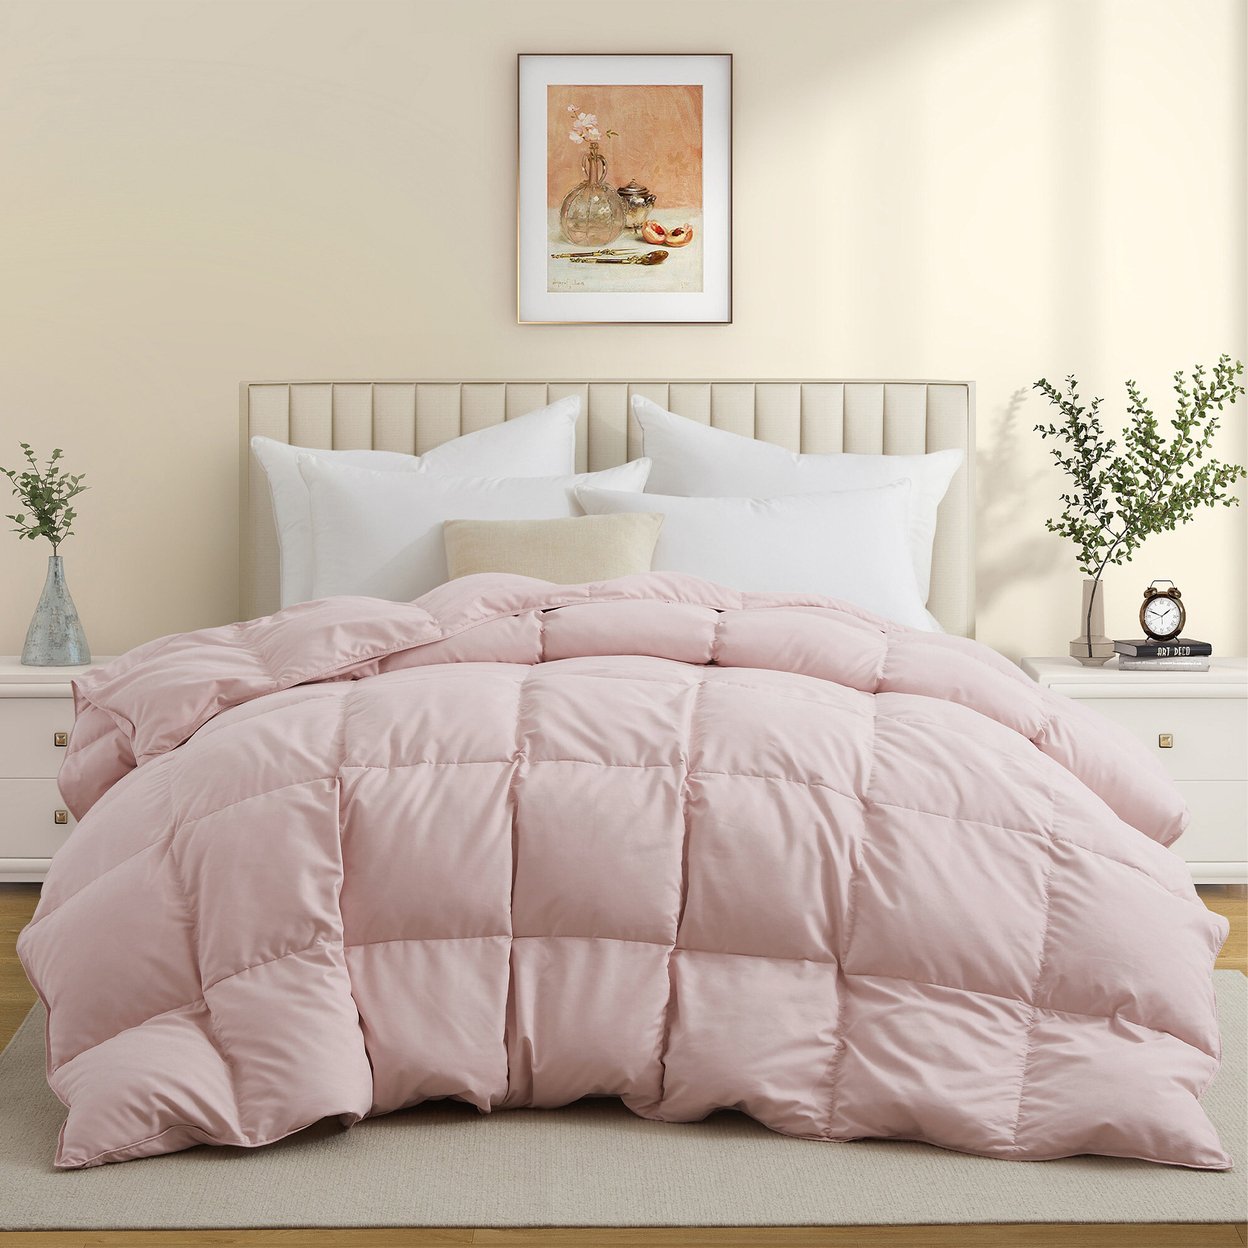 Premium All Seasons White Goose Feather Fiber And Down Comforter - Lotus Pink, Full/Queen